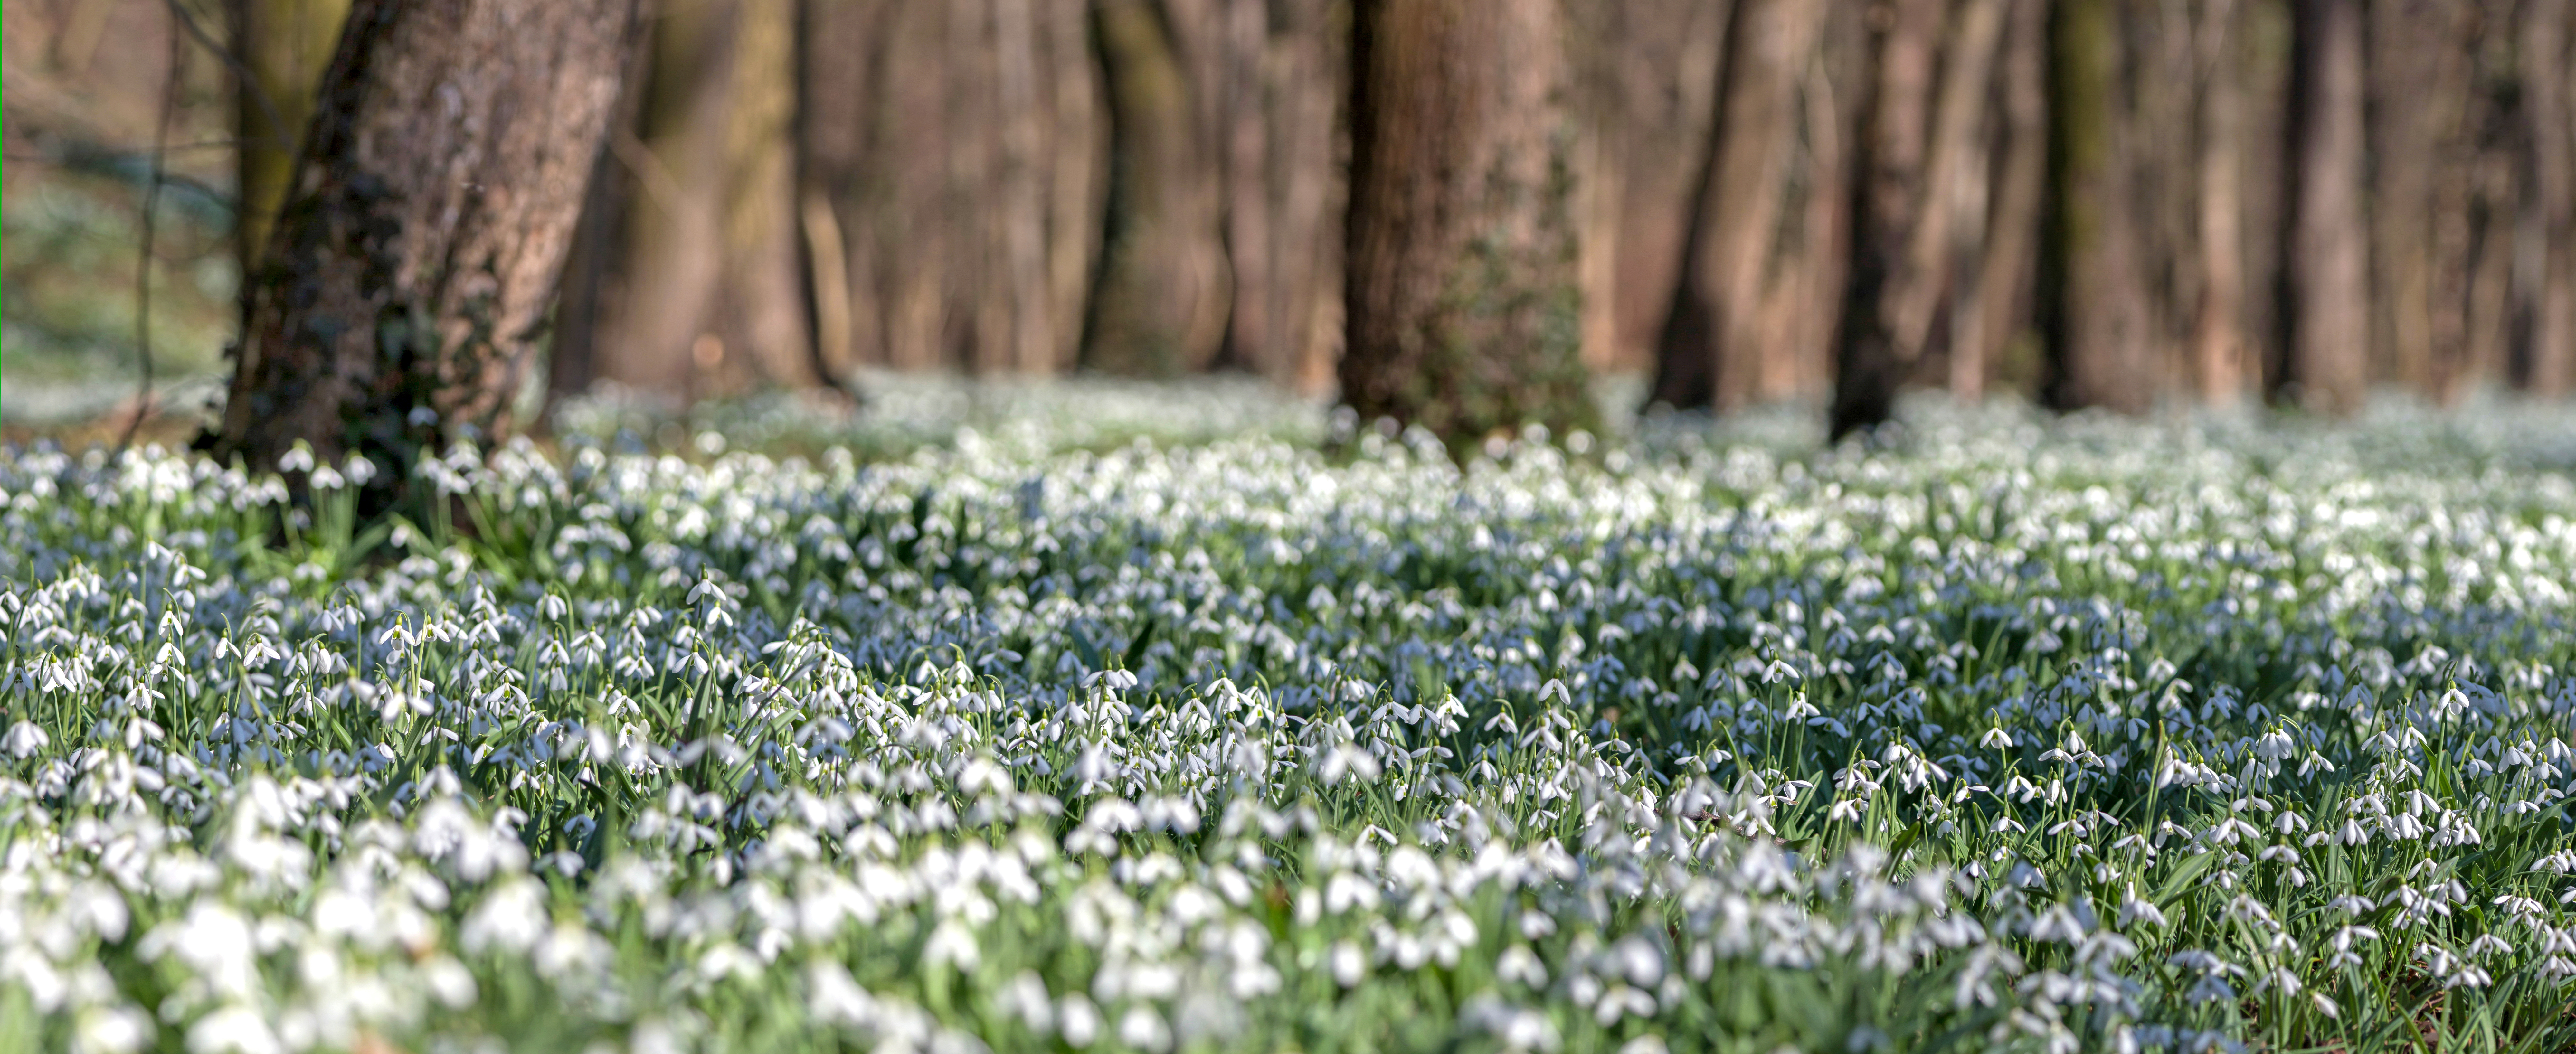 Snowdrops in woodland setting